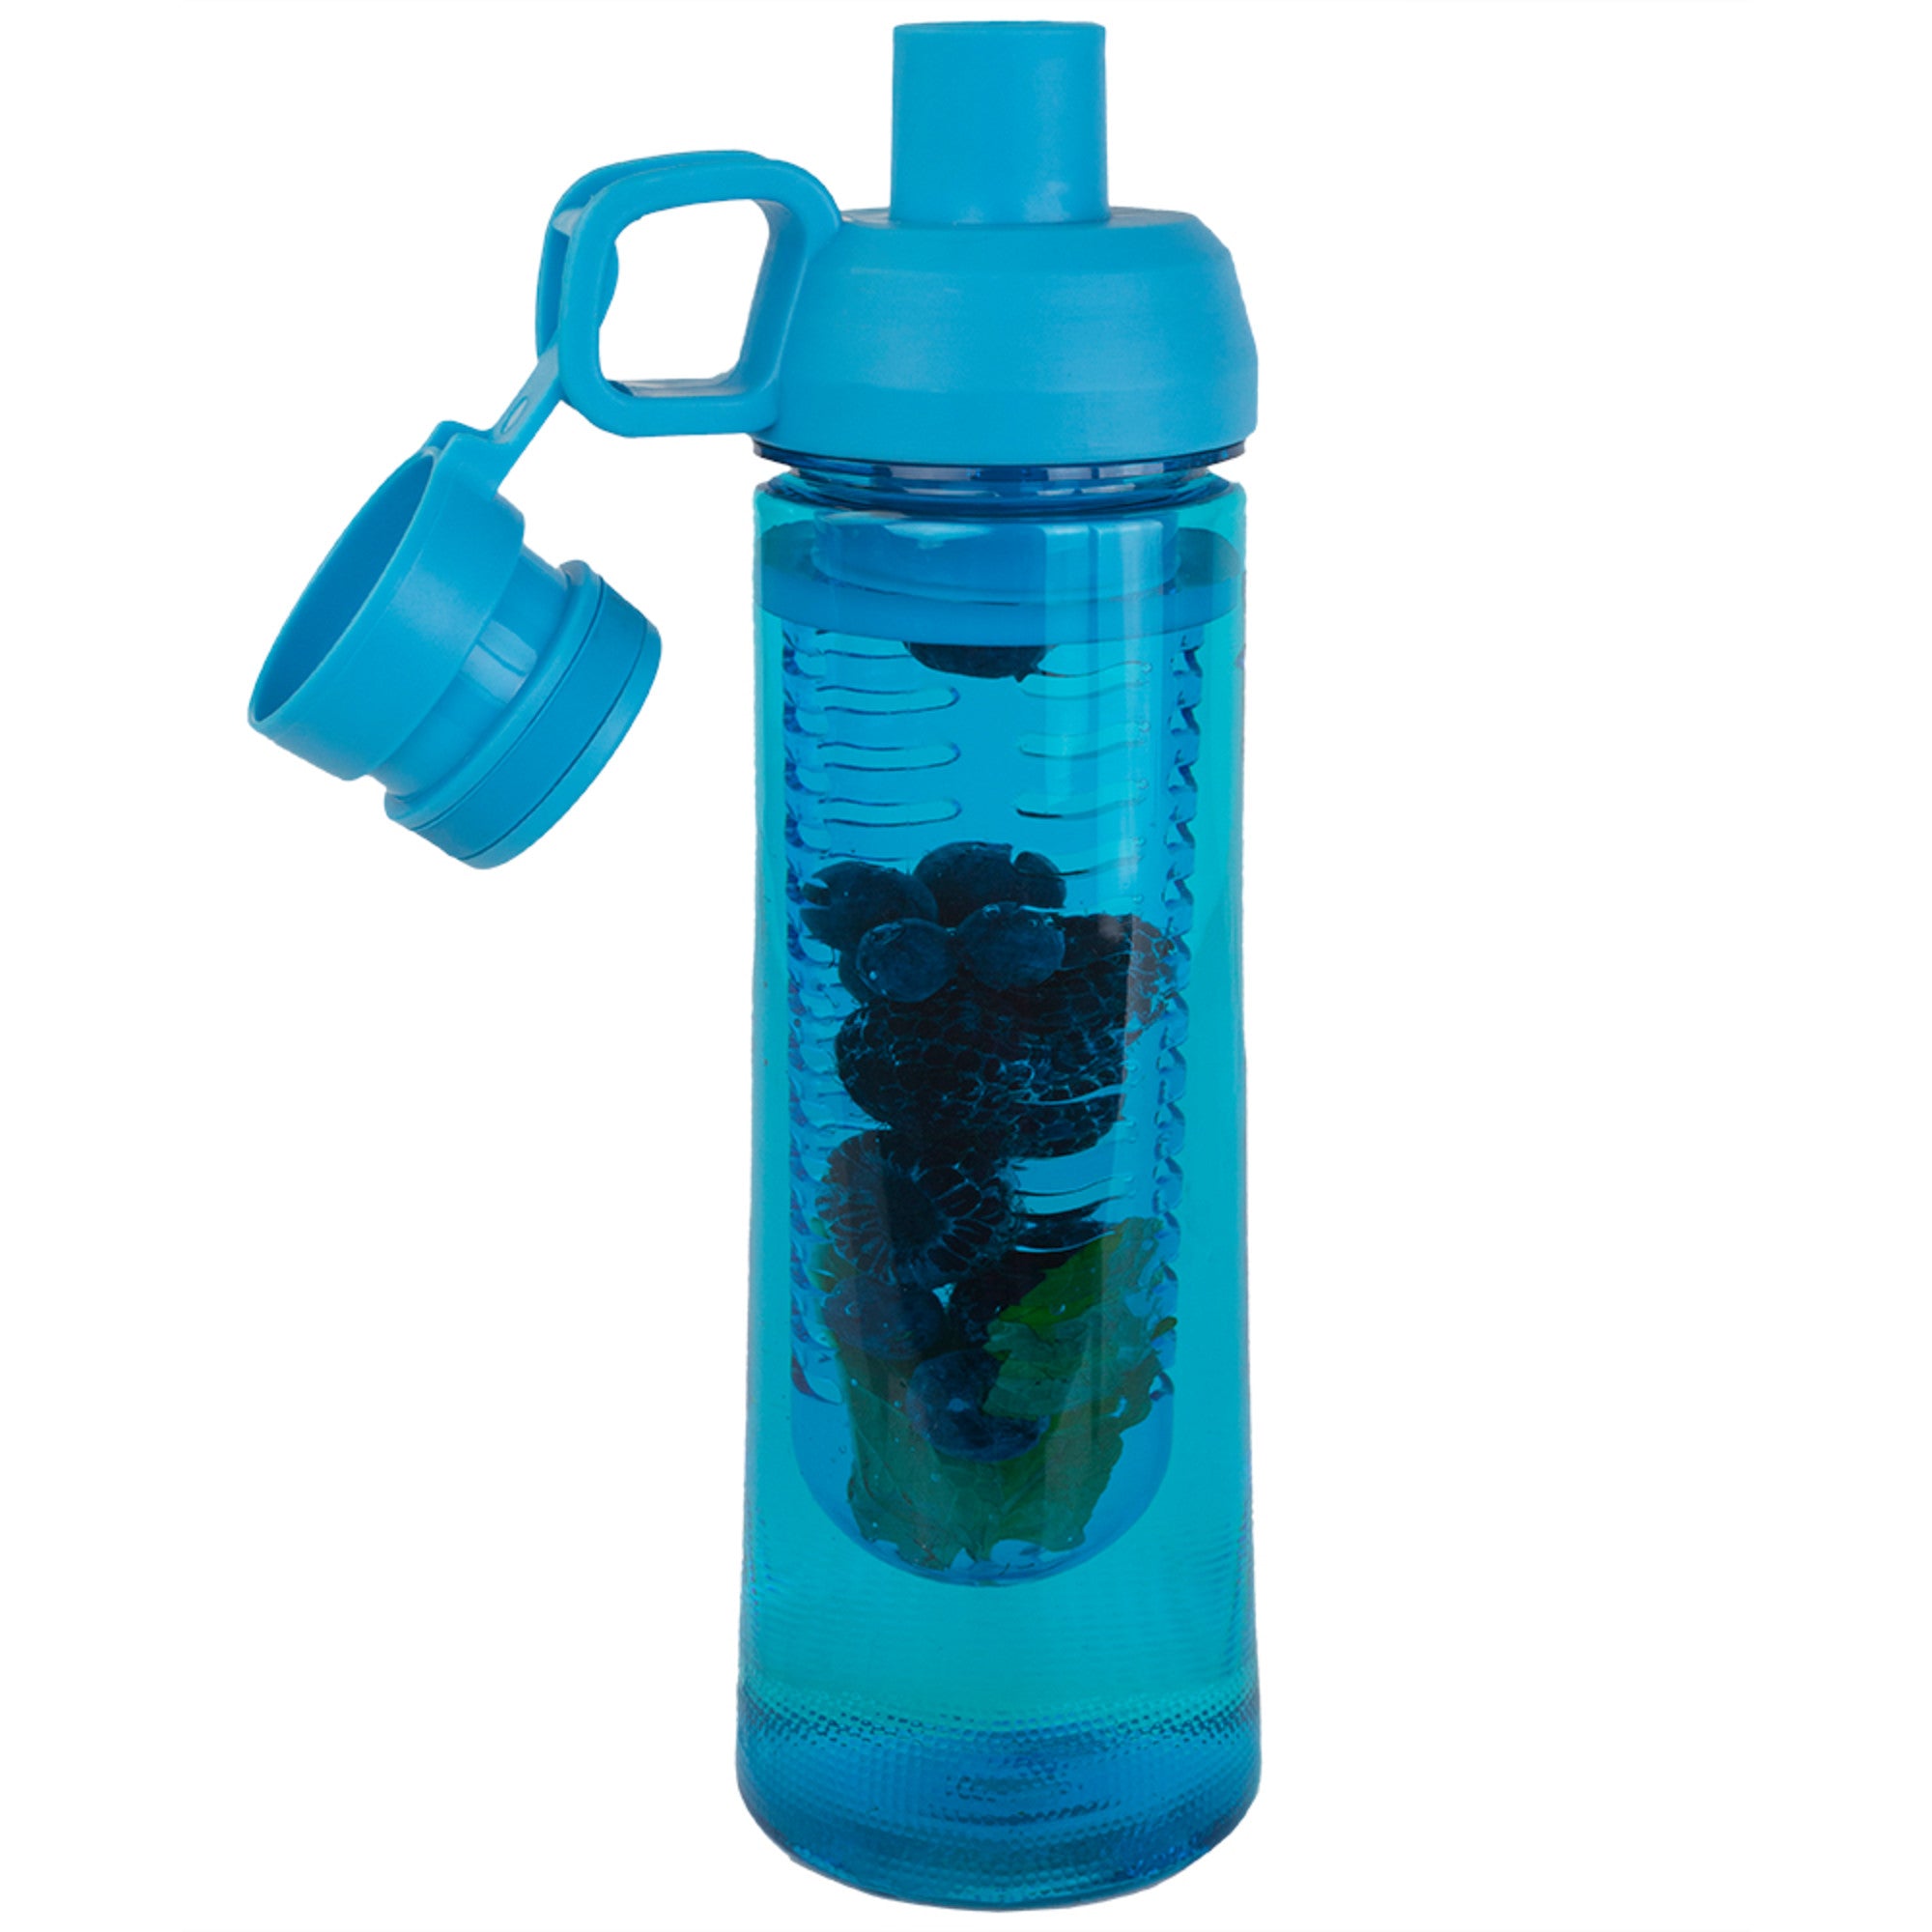 Home Basics 24 oz. Plastic Infuser Bottle with Twist Top - Assorted Colors